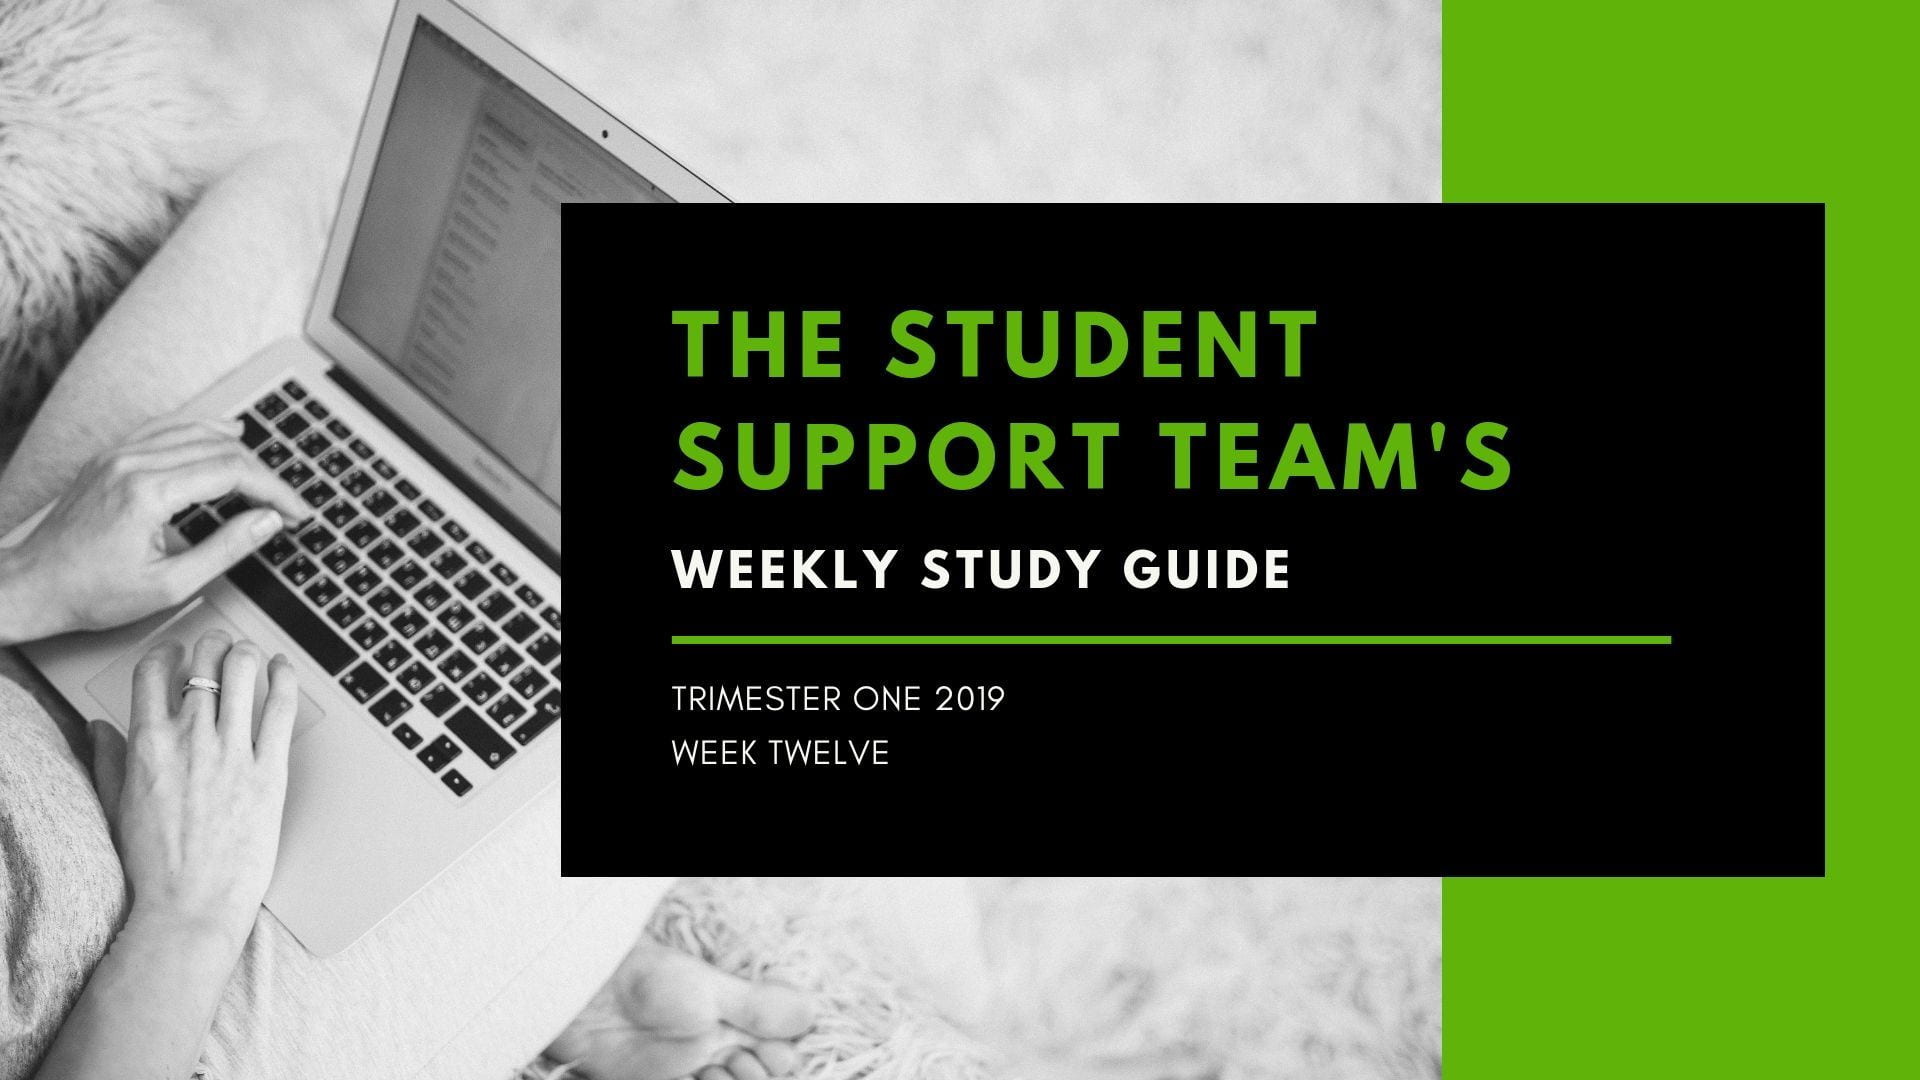 The Student Support Team’s Weekly Study Guide: Week Twelve; Get Study Tips and Tricks